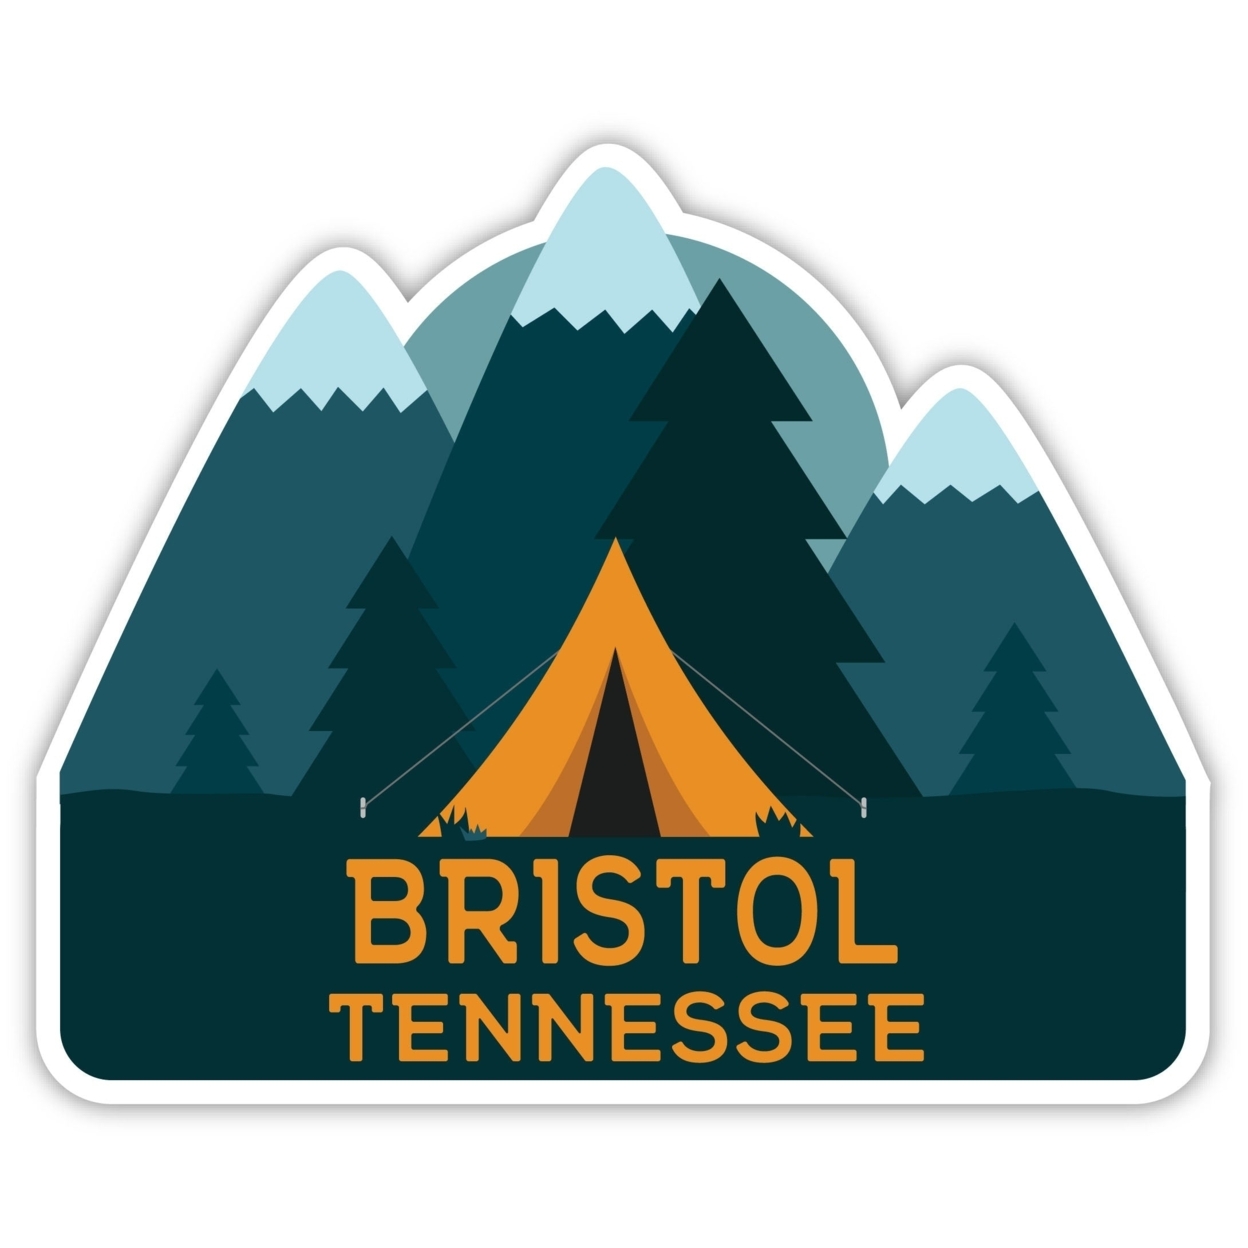 Bristol Tennessee Souvenir Decorative Stickers (Choose Theme And Size) - 4-Pack, 8-Inch, Tent